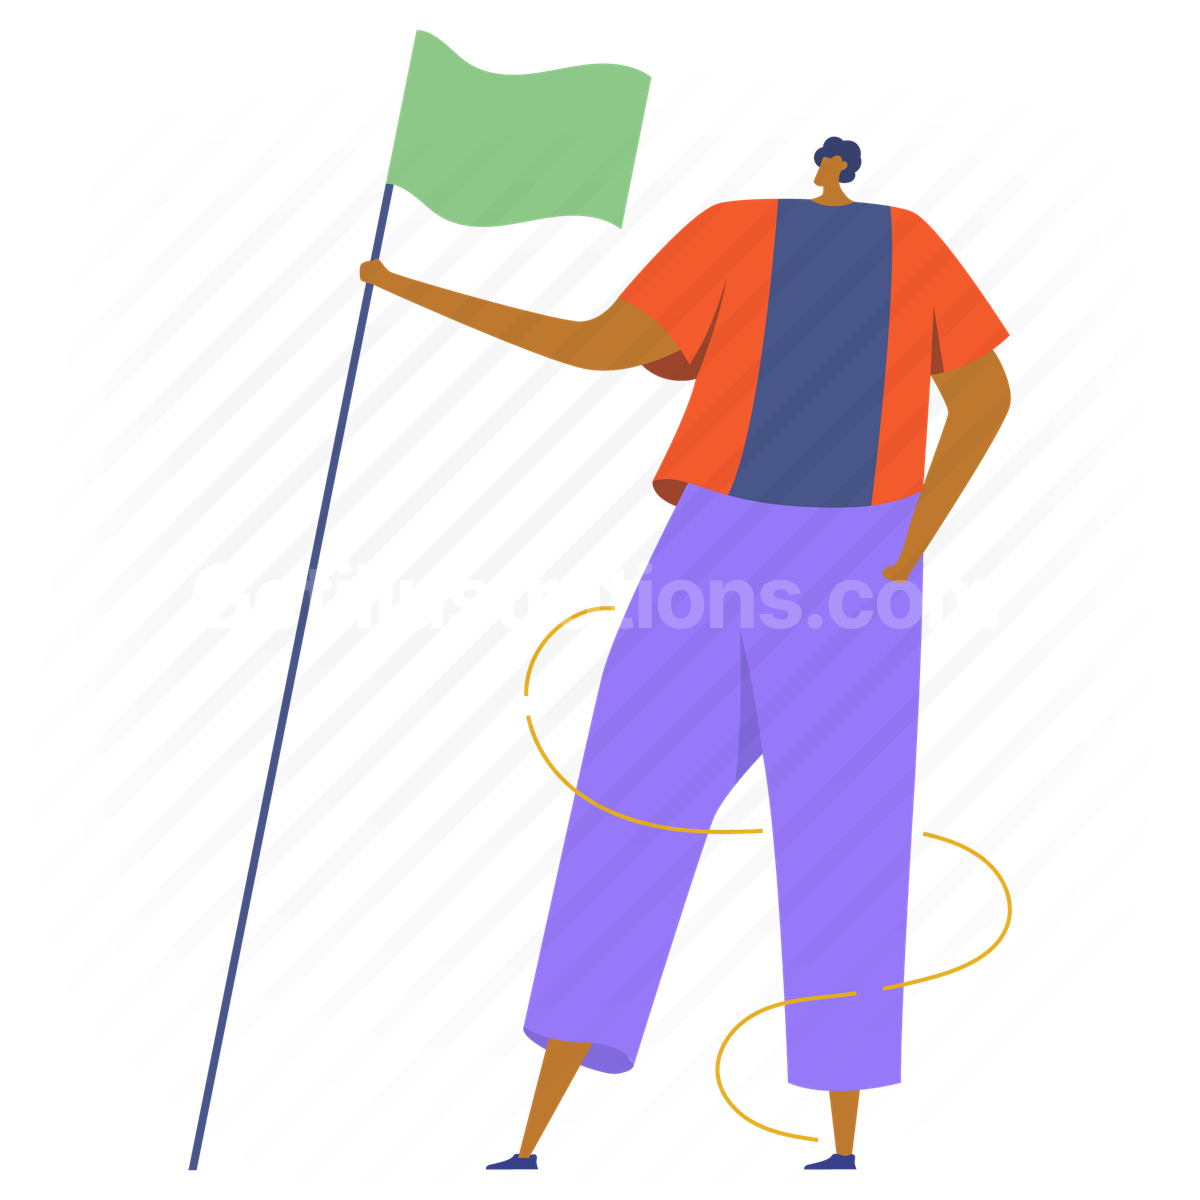 achievement, accomplishment, flag, flags, flagged, man, people, person